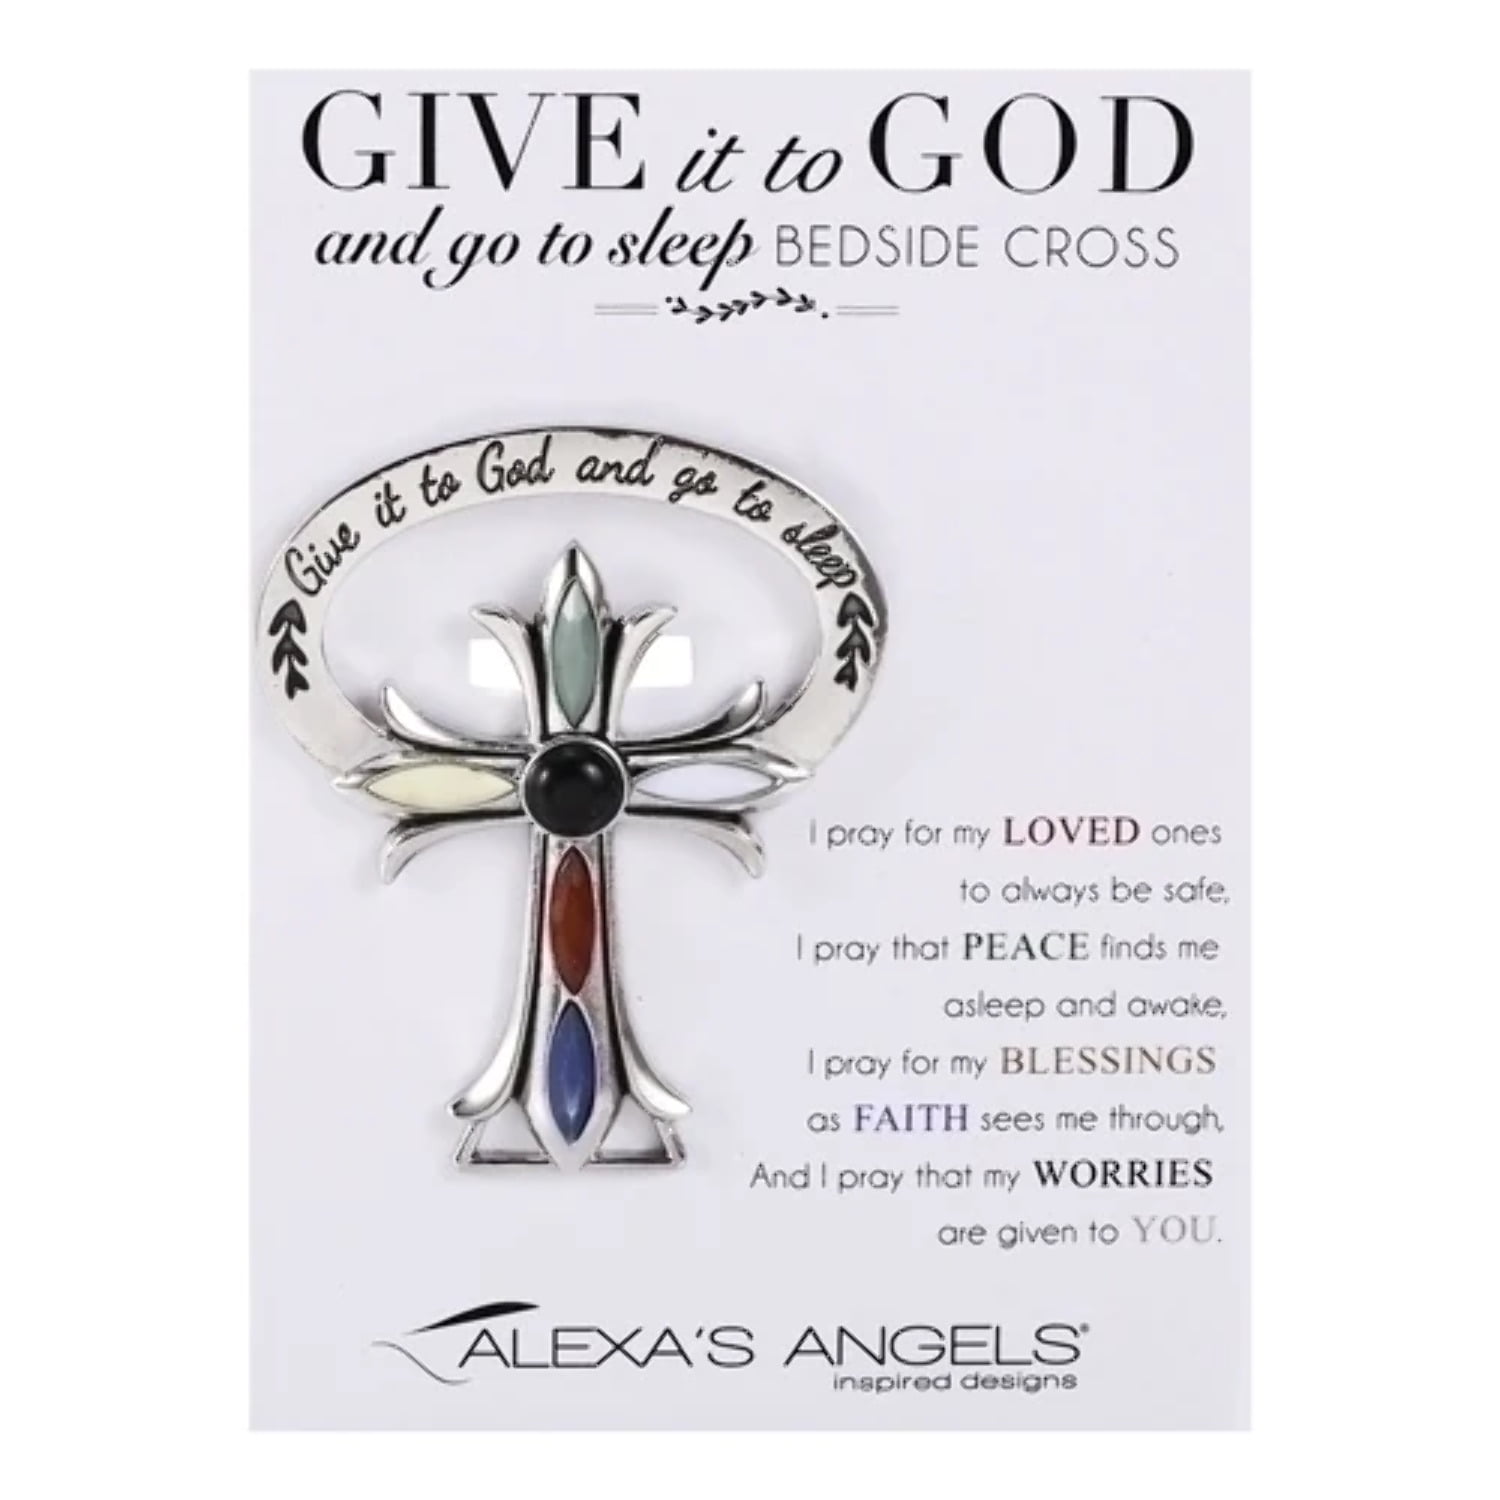 Picture of Alexas Angels 190005 2.5 in. Bedside Cross-Give it to God & Go to Sleep Cross Carded